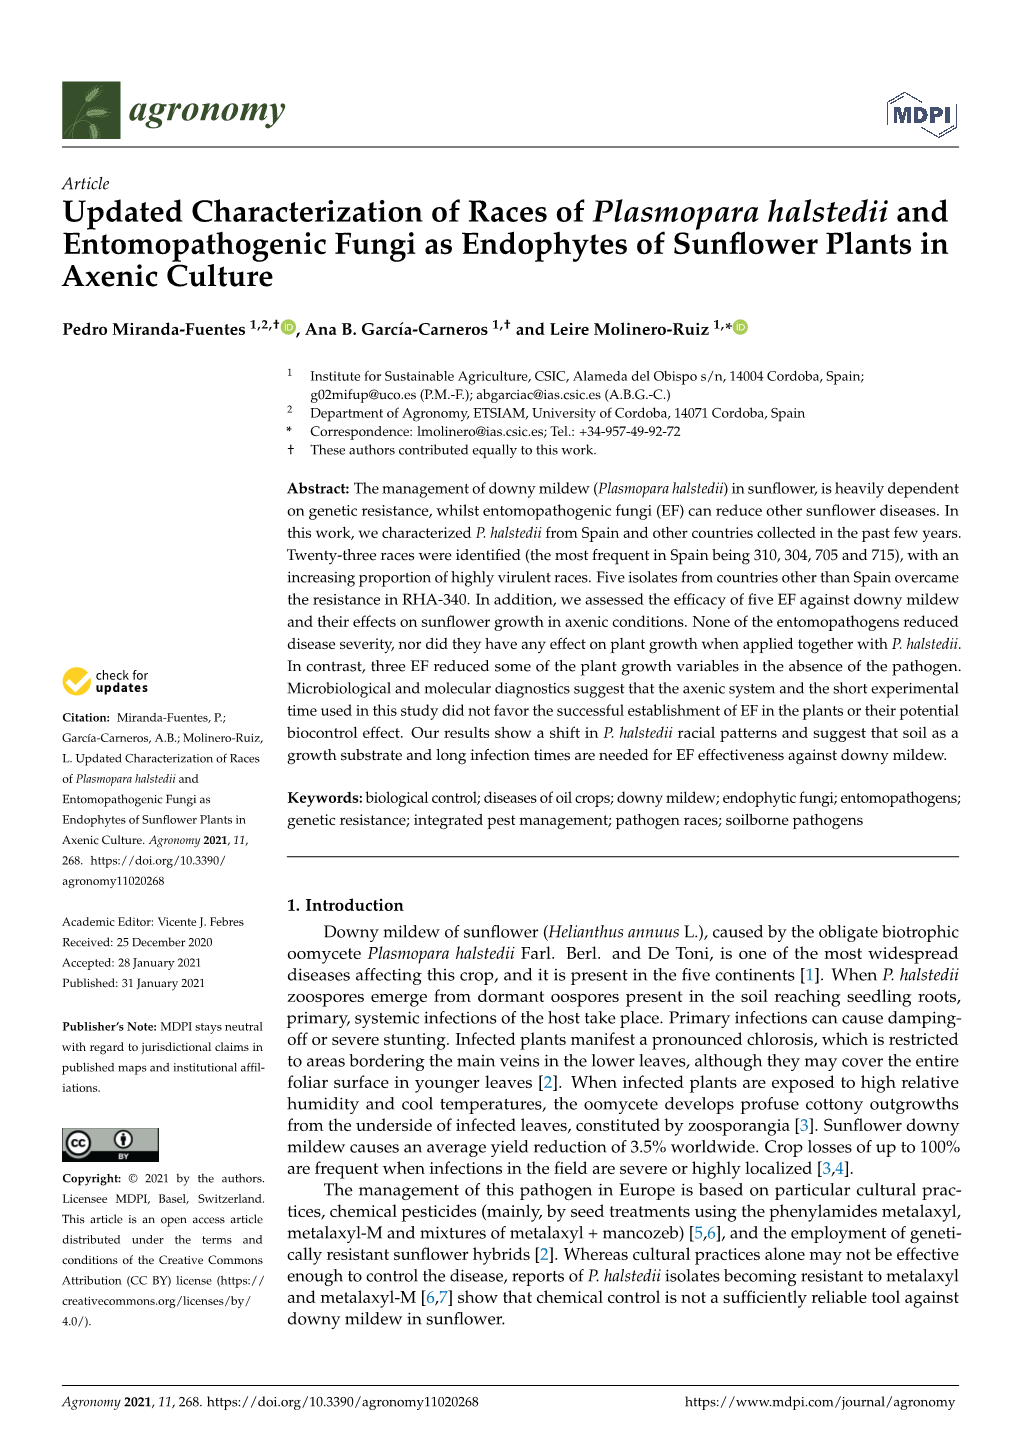 Updated Characterization of Races of Plasmopara Halstedii and Entomopathogenic Fungi As Endophytes of Sunﬂower Plants in Axenic Culture